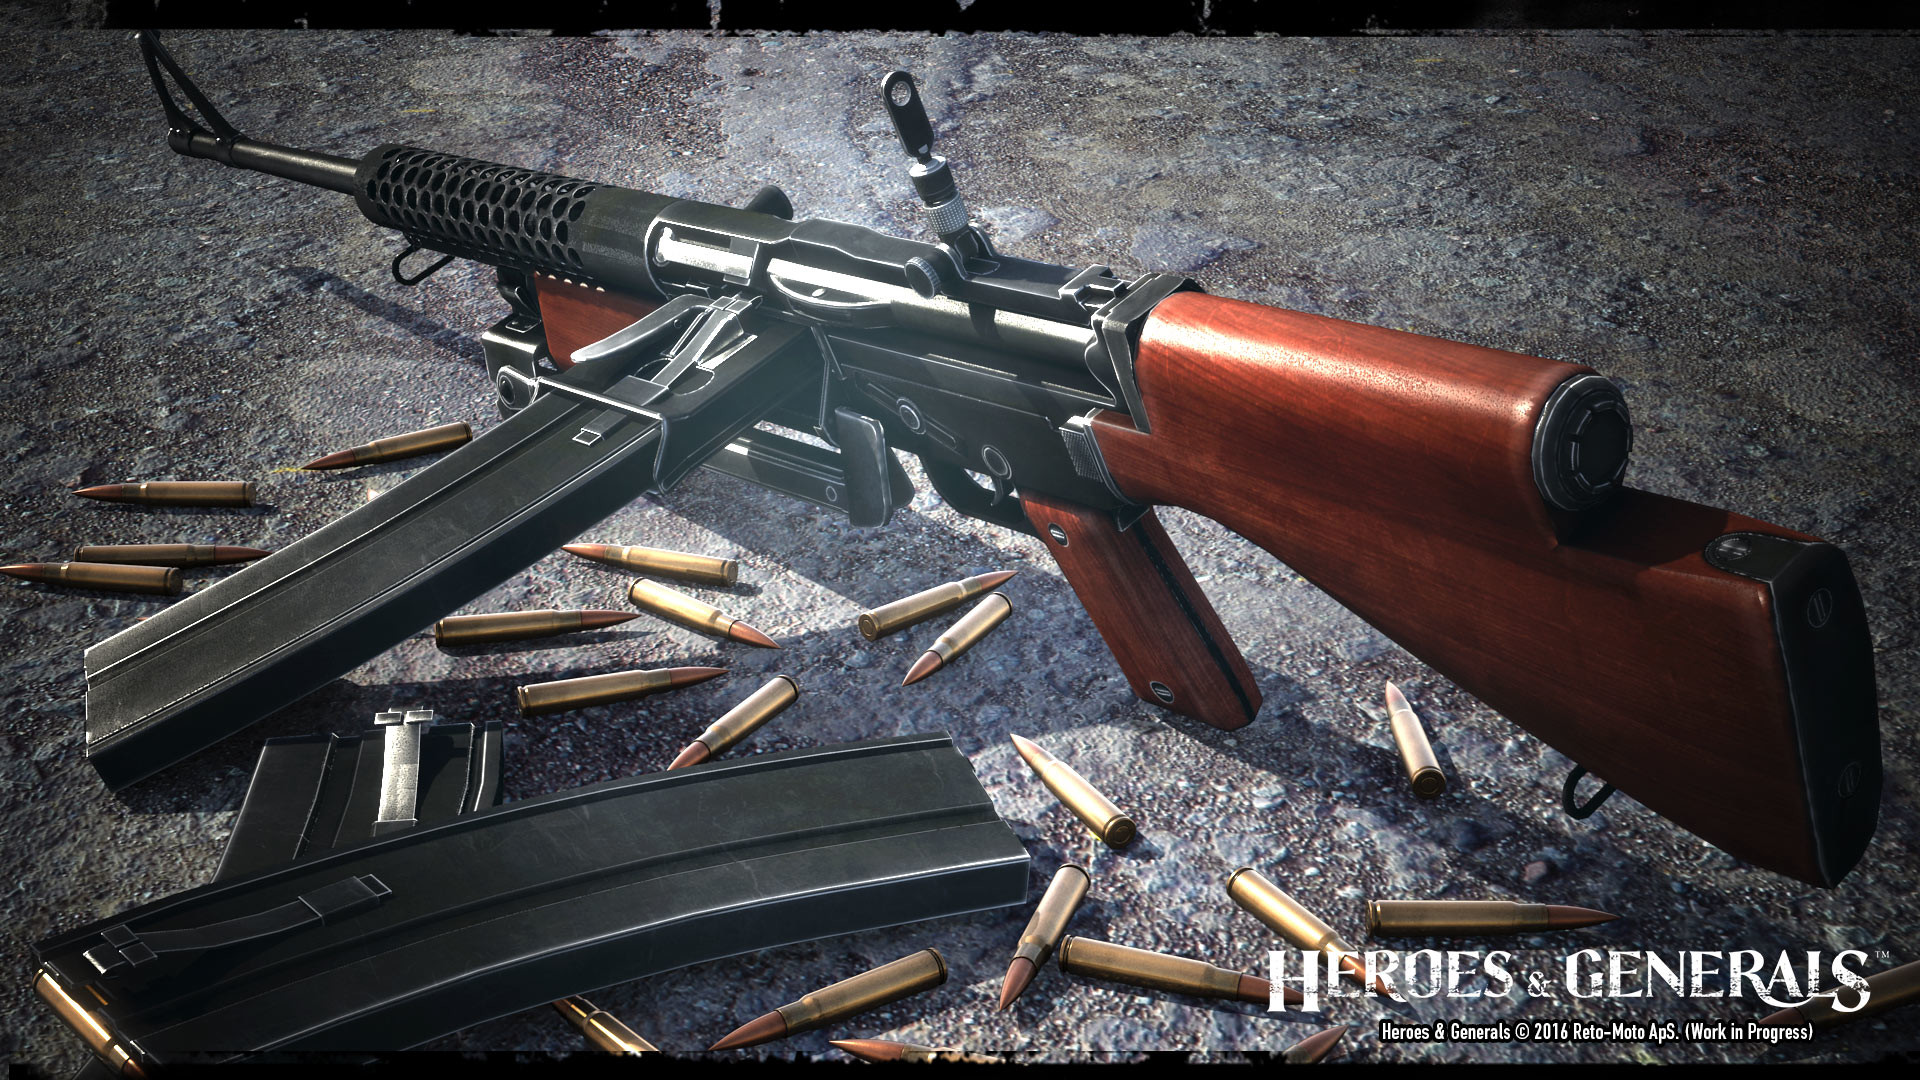 Download - Heroes And Generals M1941 , HD Wallpaper & Backgrounds